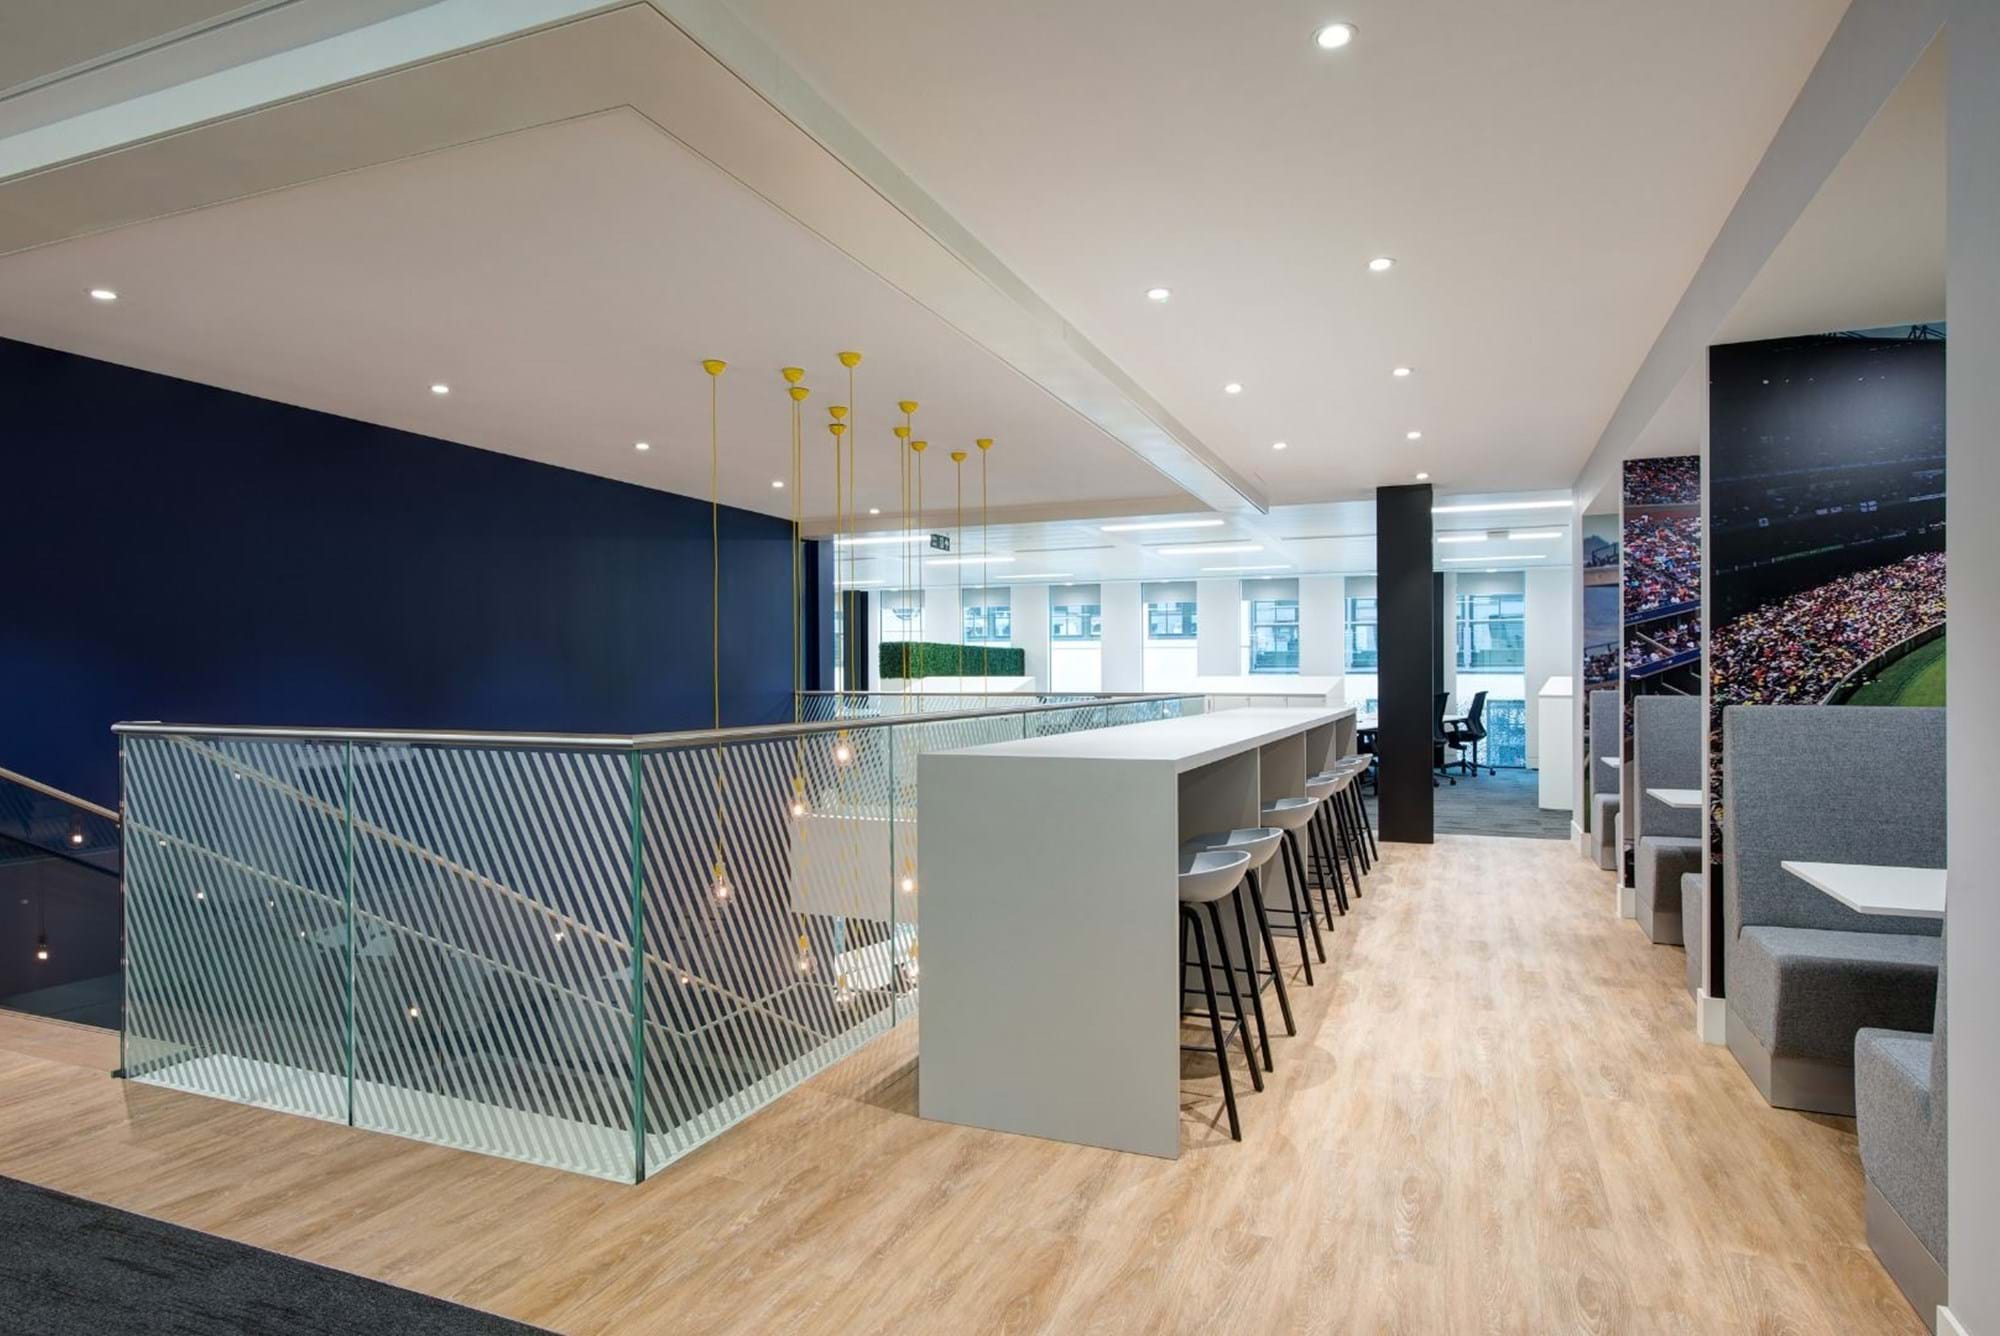 Modus Workspace office design, fit out and refurbishment - William Hill - William Hill 19 highres sRGB.jpg